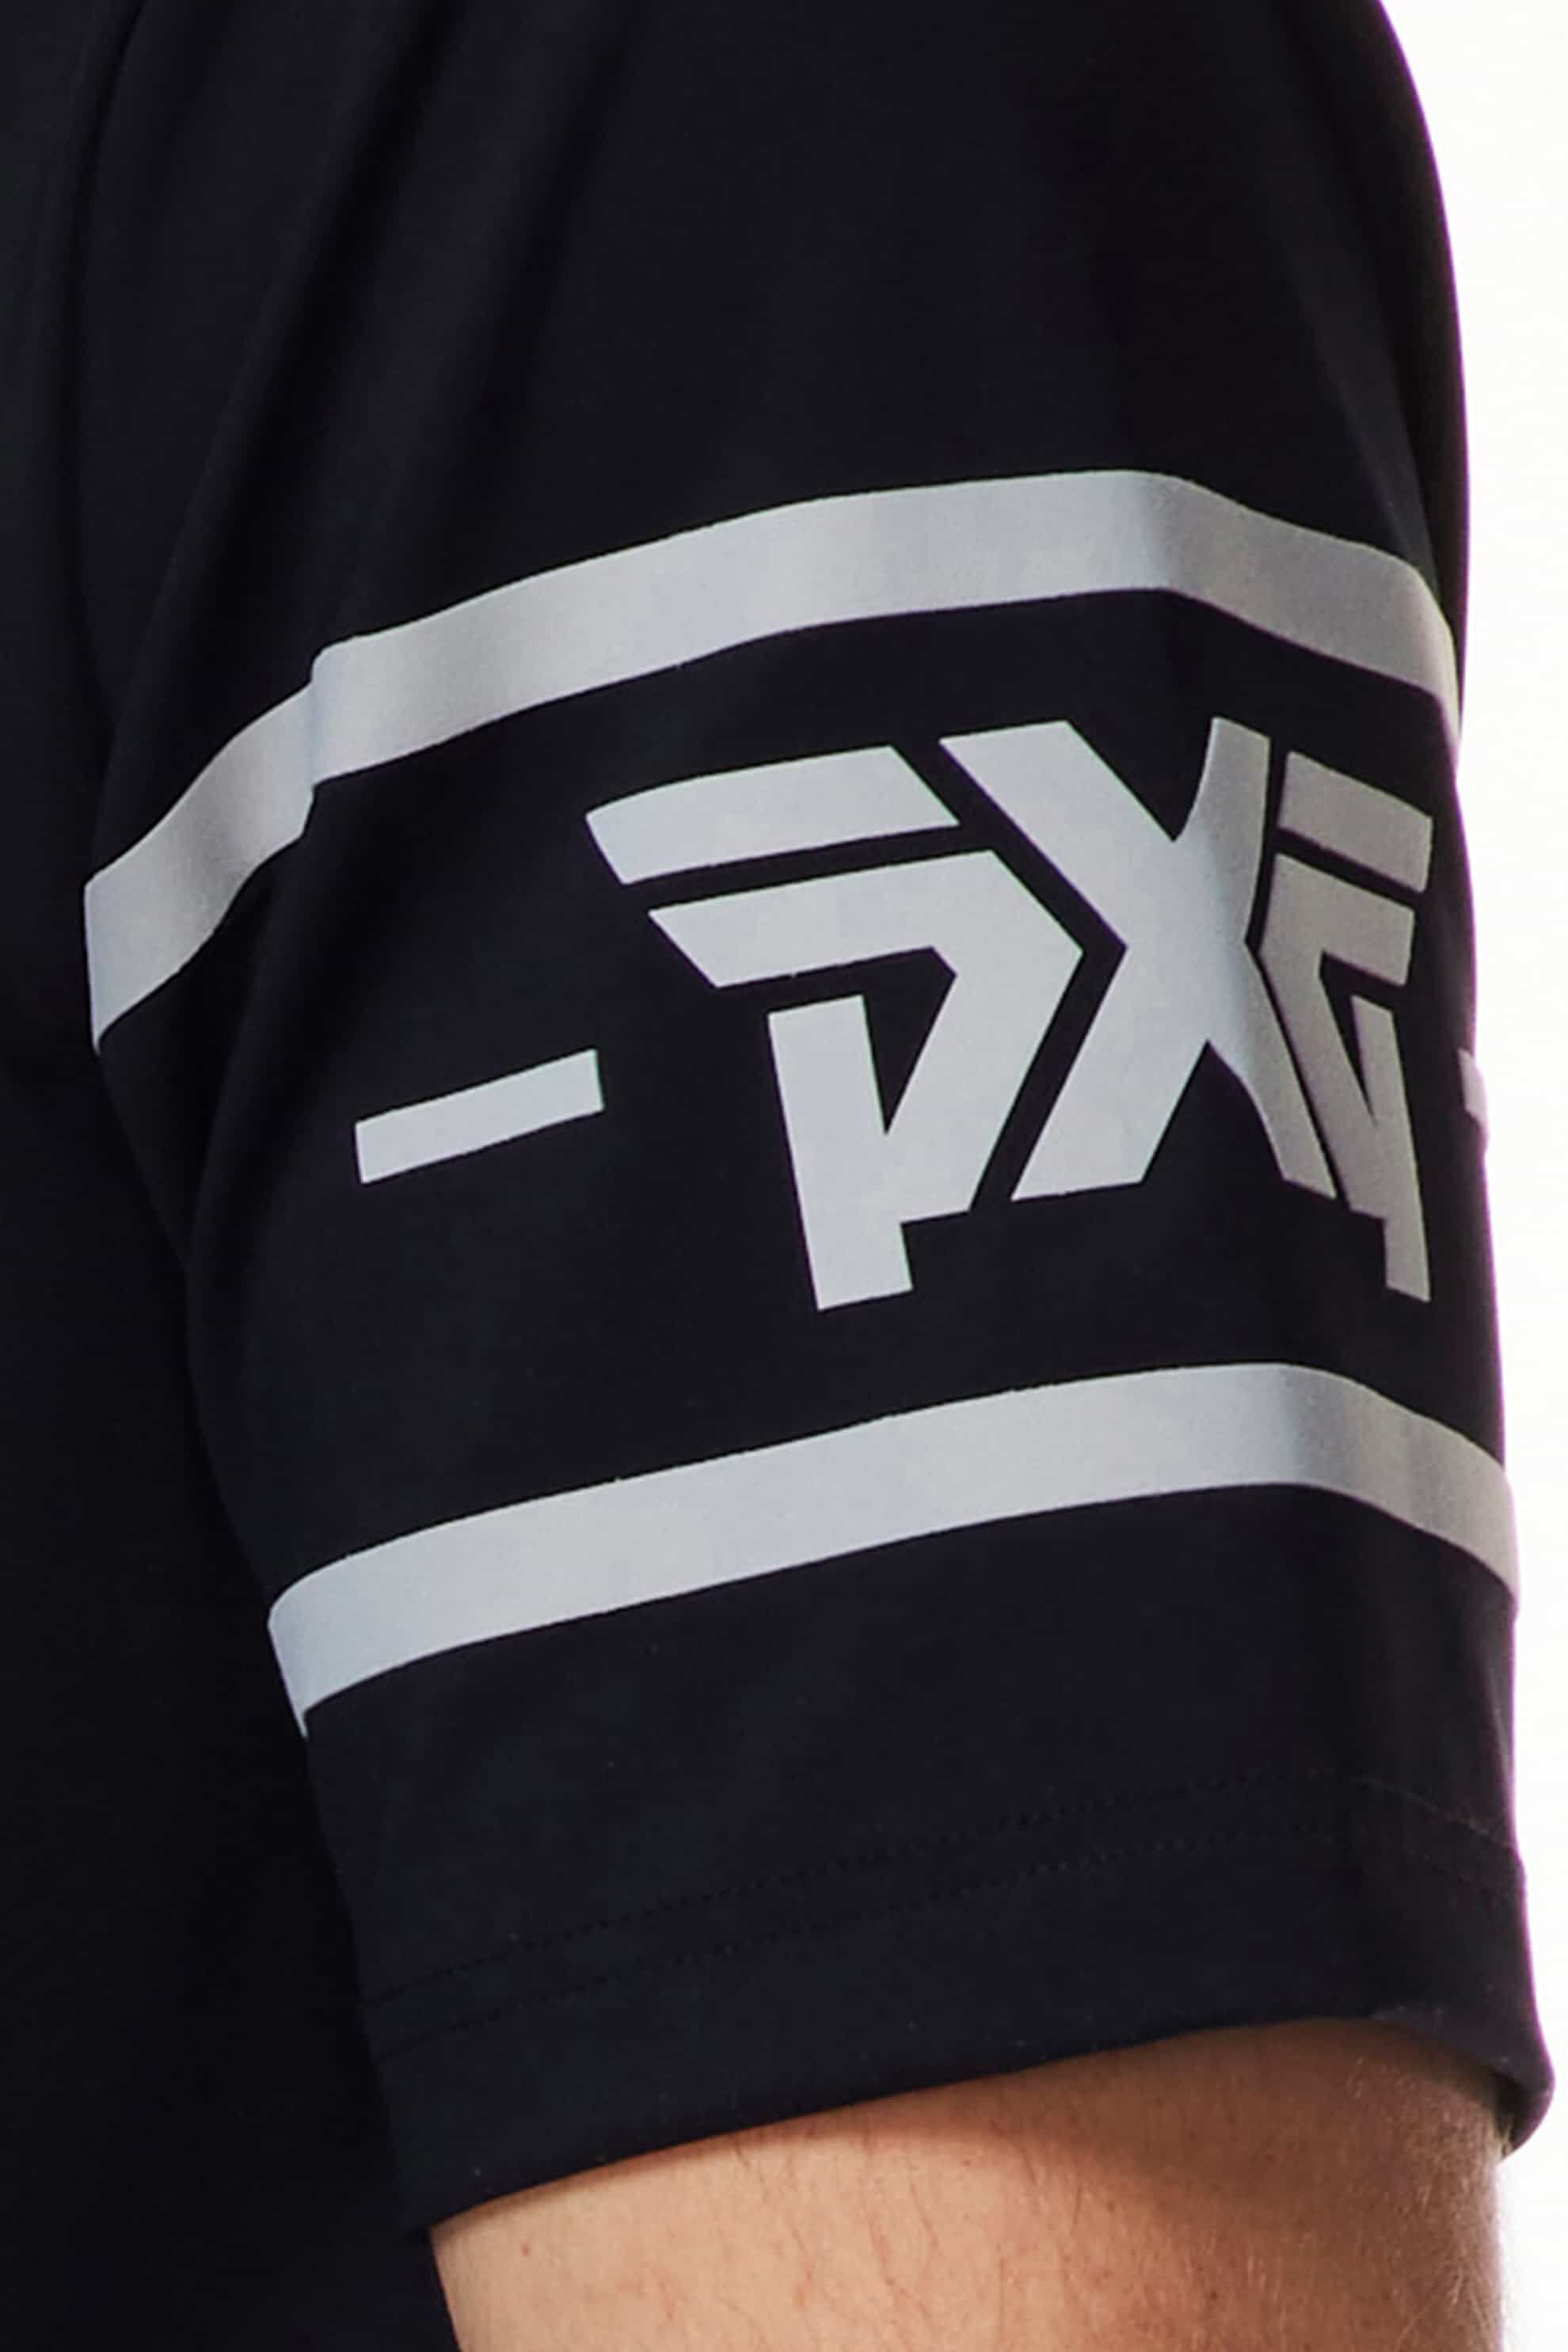 Comfort Fit Racer Polo Shop the Highest Quality Golf Apparel, Gear, Accessories and Golf Clubs at PXG